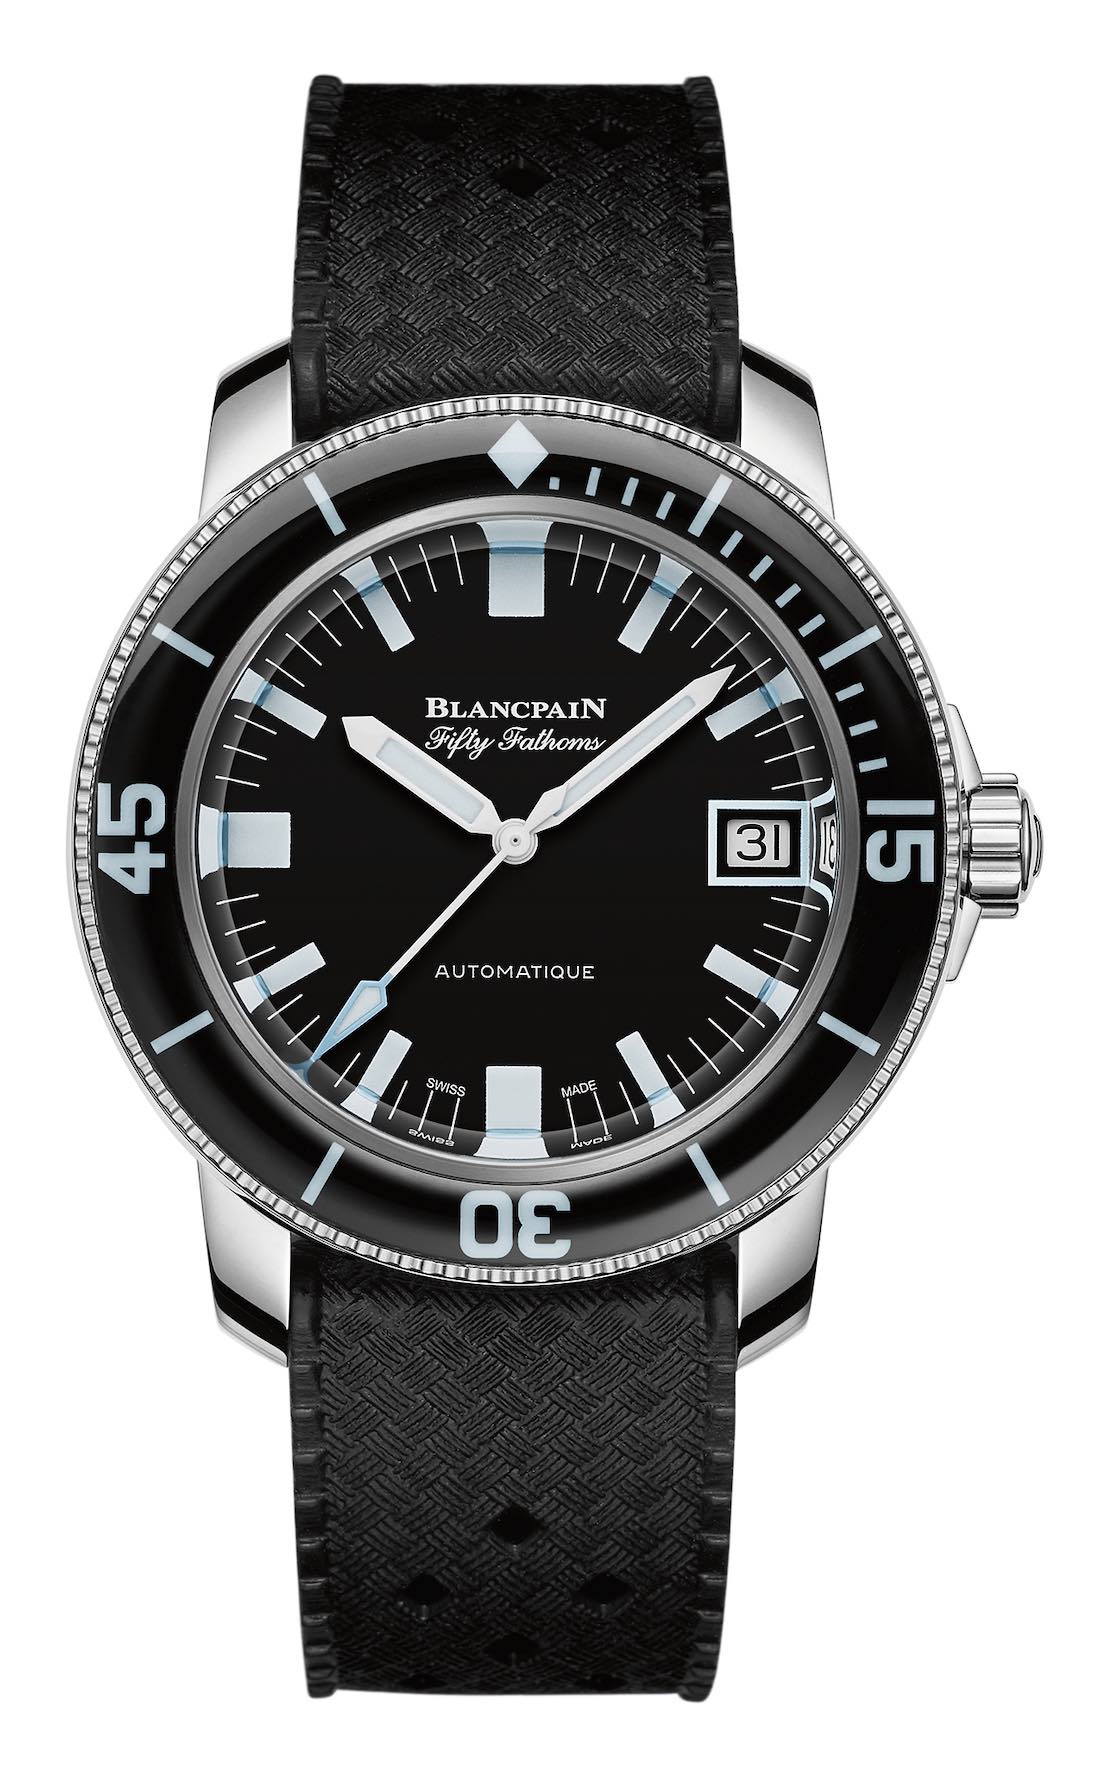 Only WATch 2019 Blancpain